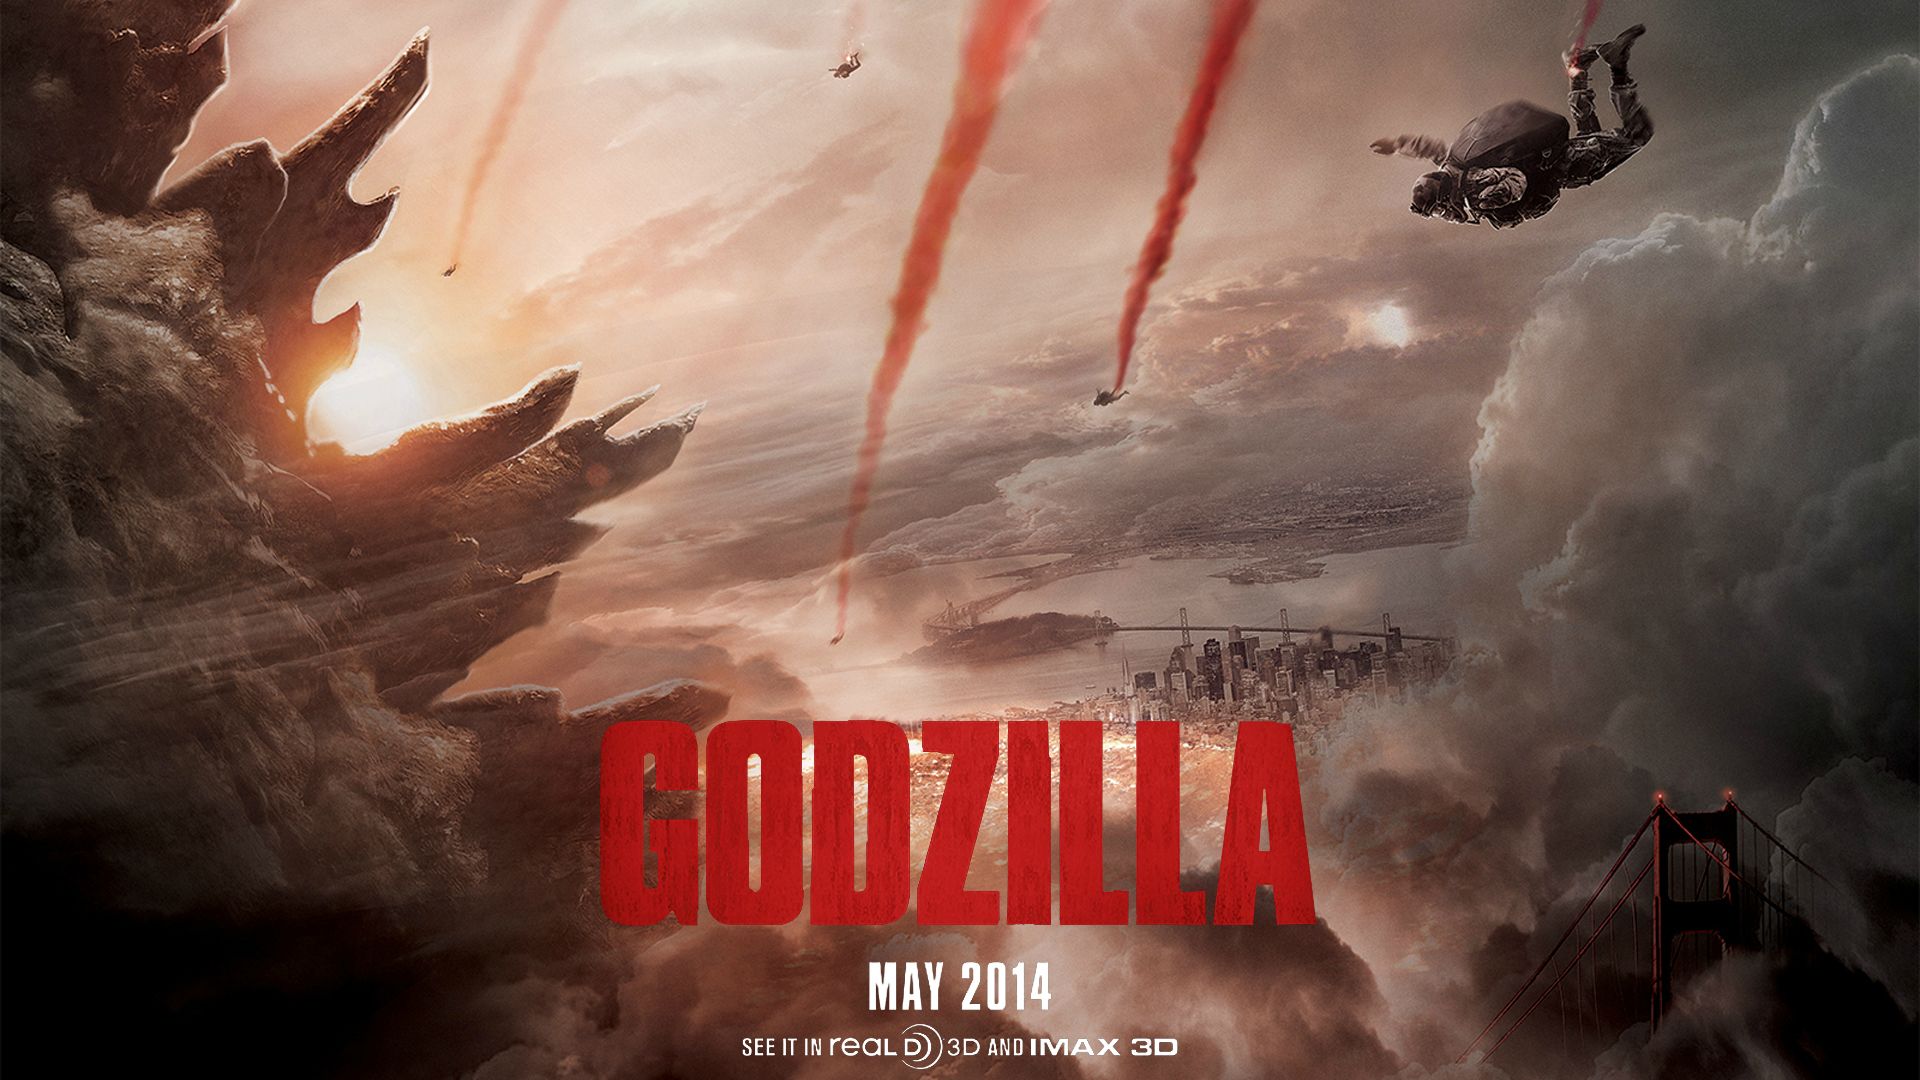 The new Godzilla trailer is all sorts of amazing